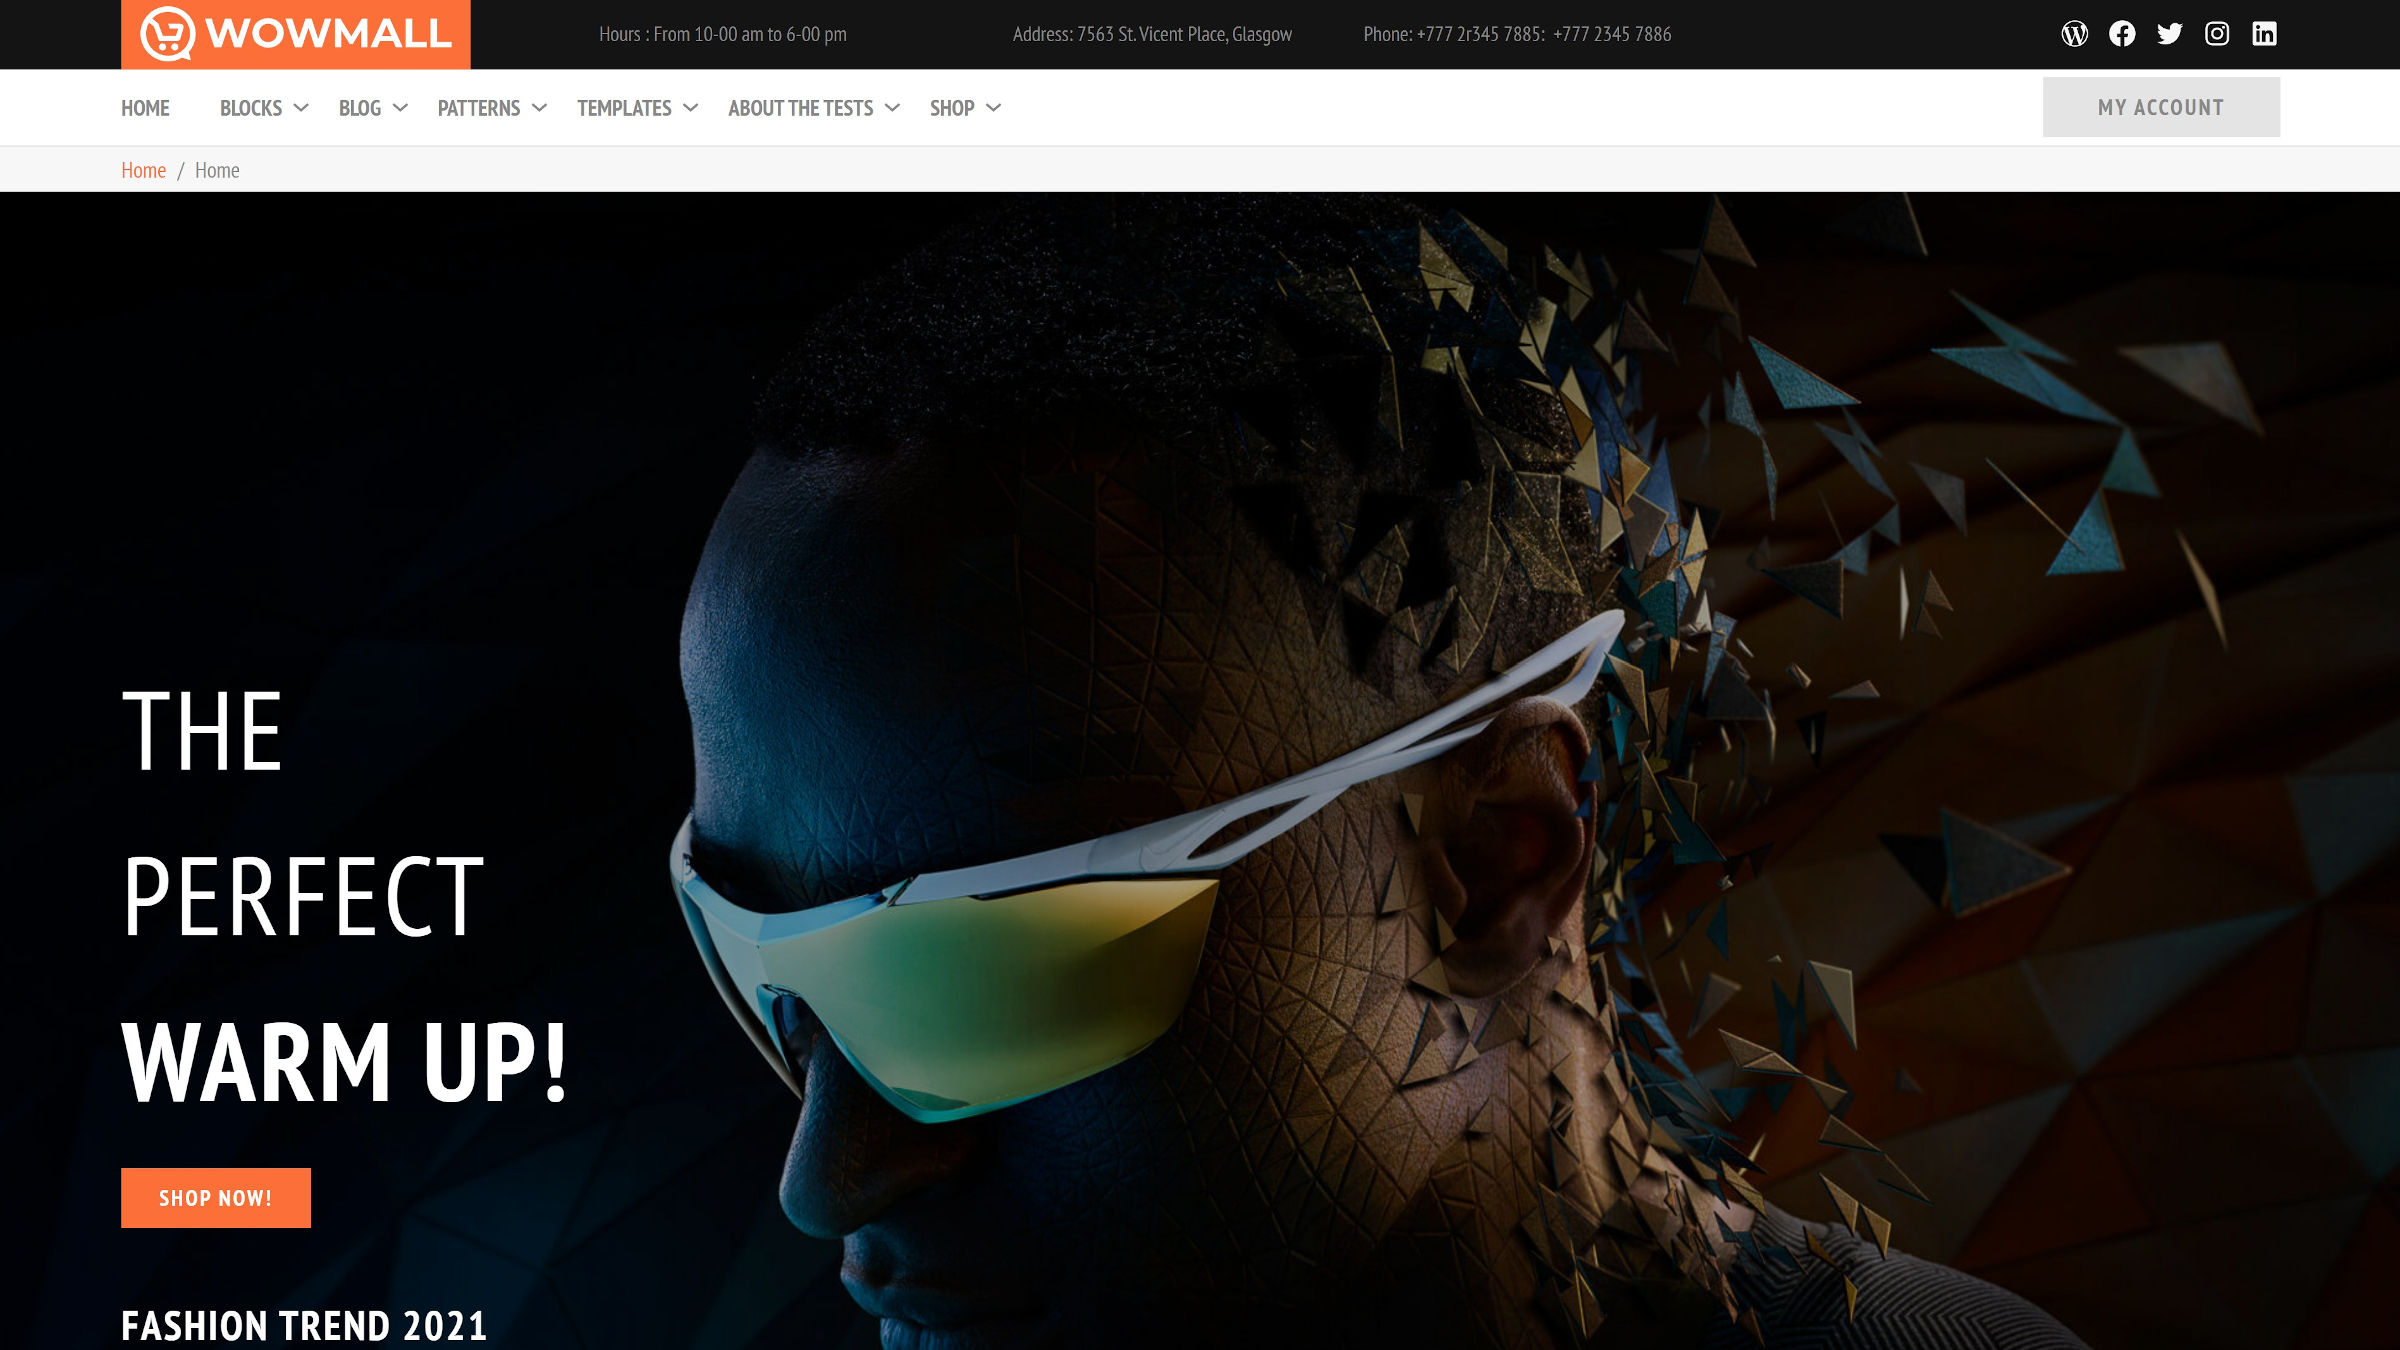 Large hero section with a man wearing sunglasses for an online shop's homepage.